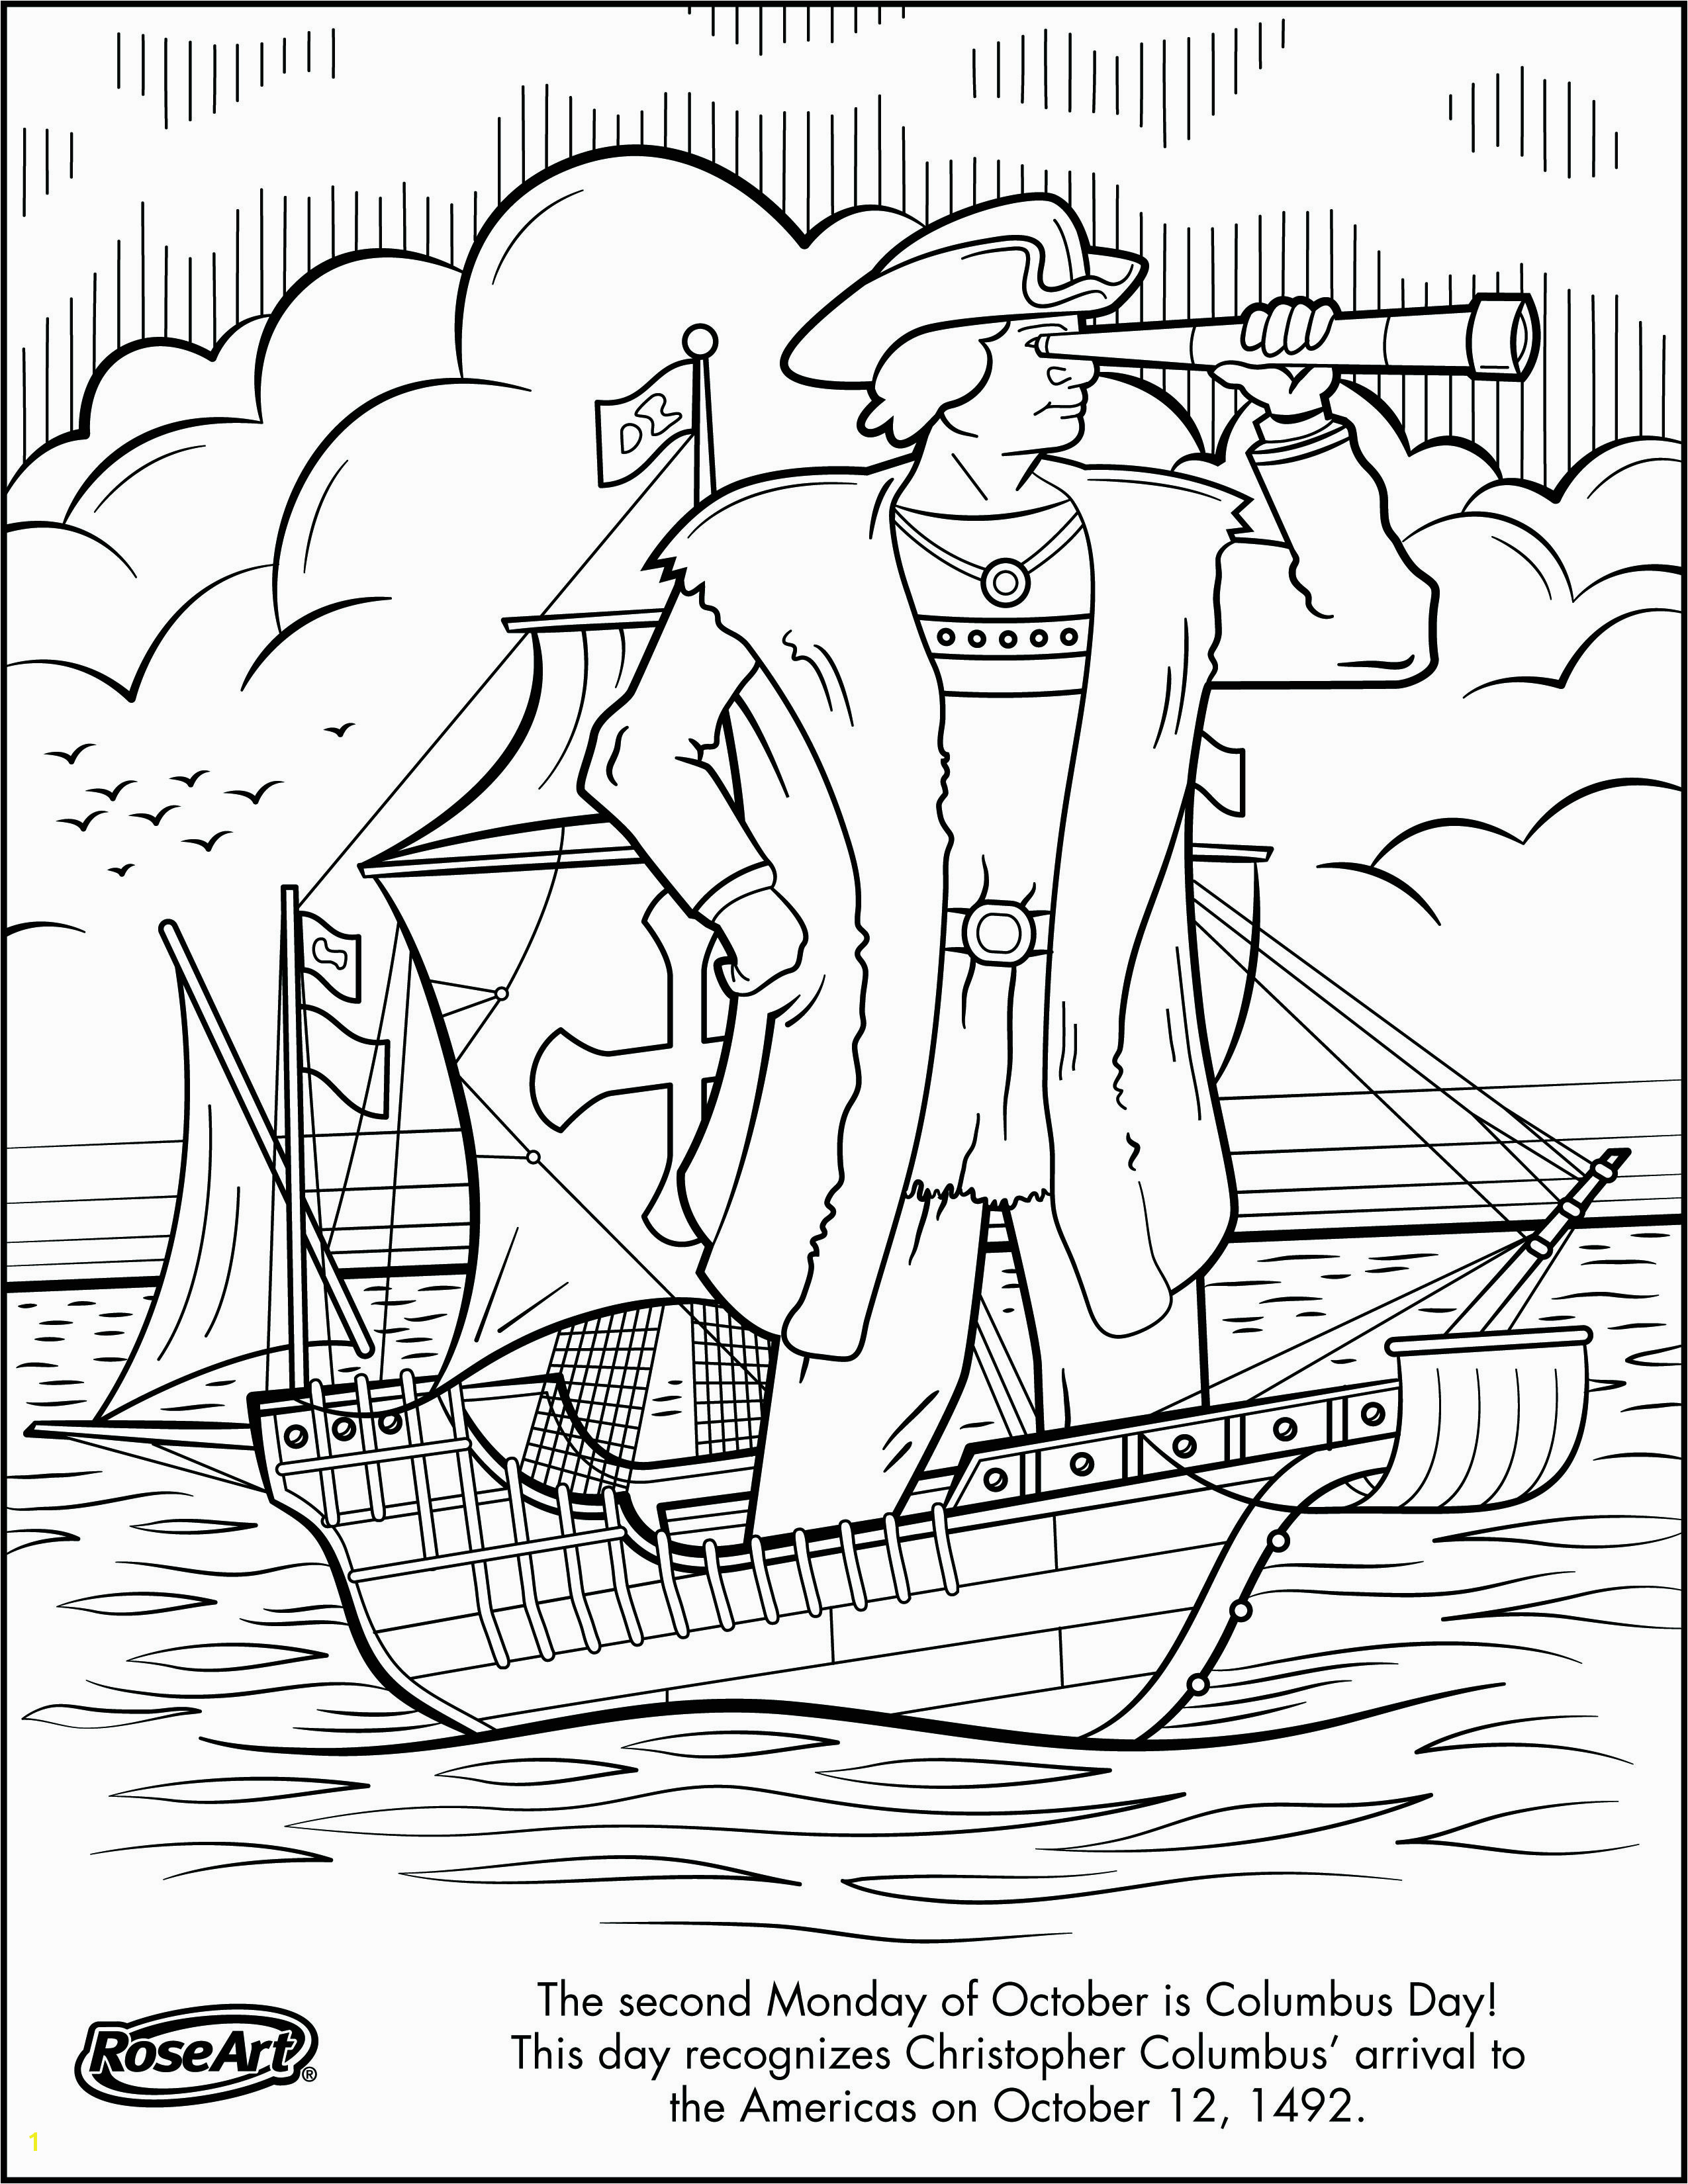 Engage younger kids with Columbus Day with printable coloring pages and easy to digest information